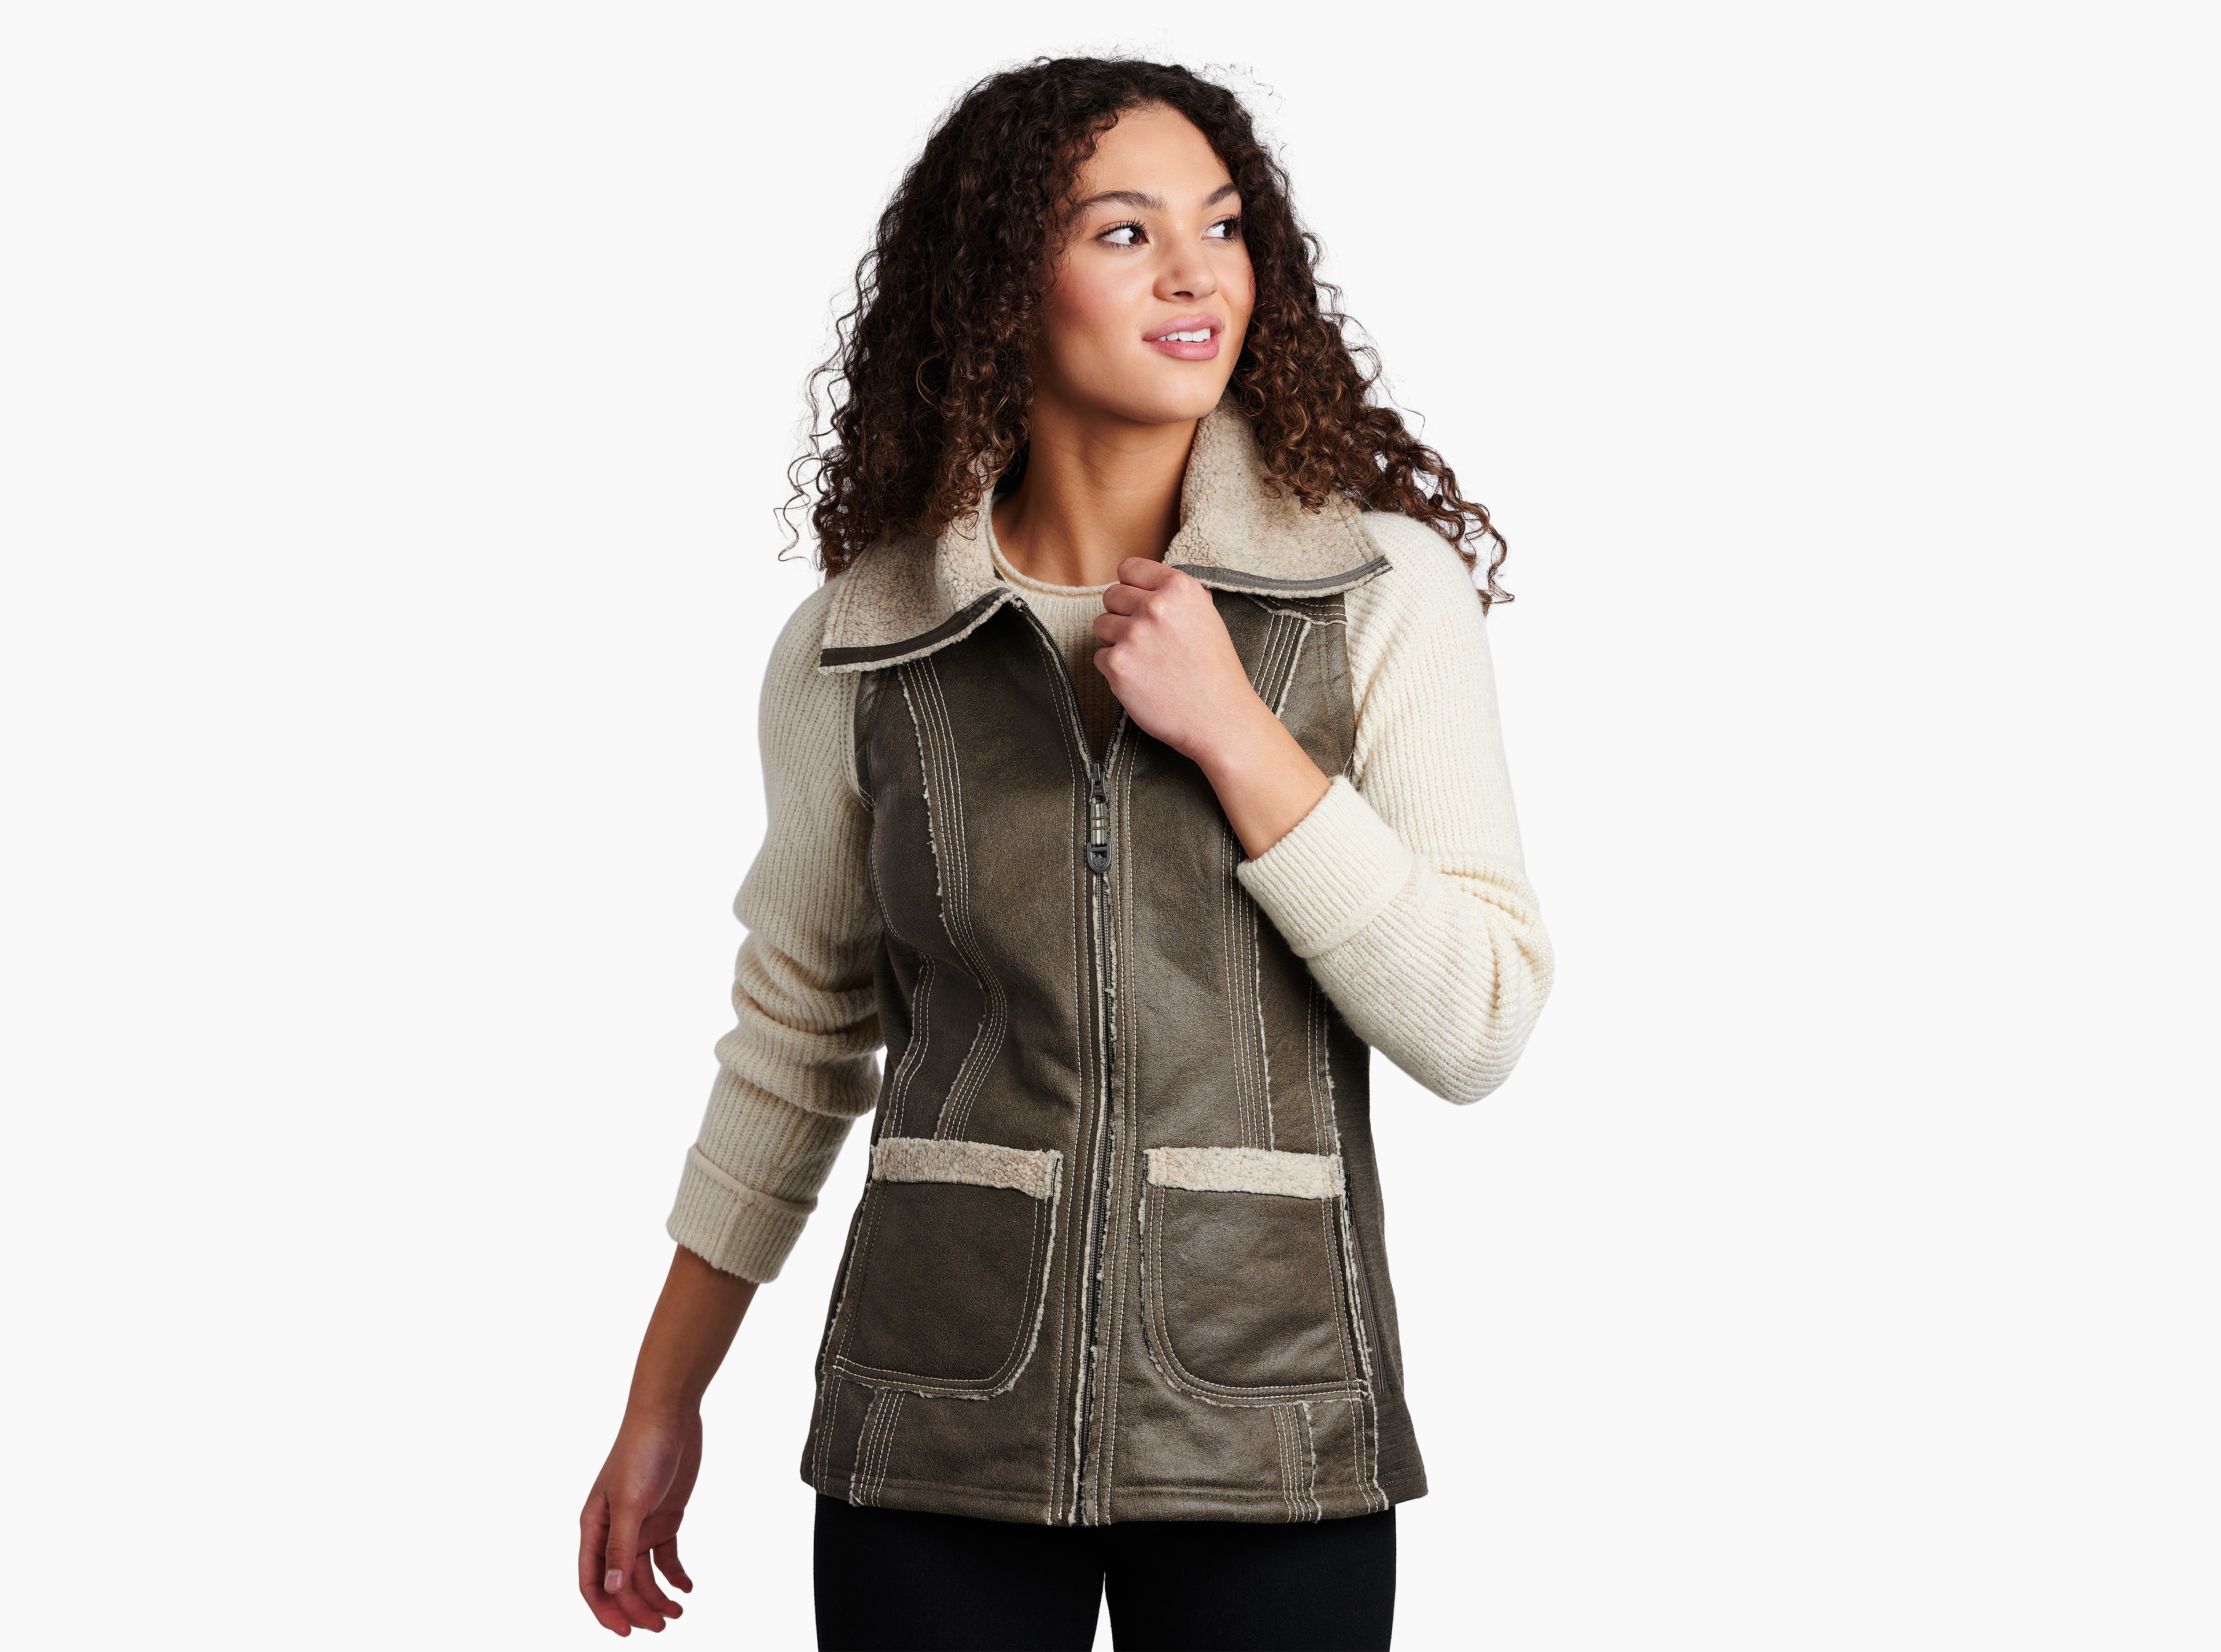 Kuhl Shearling Athletic Jackets for Women